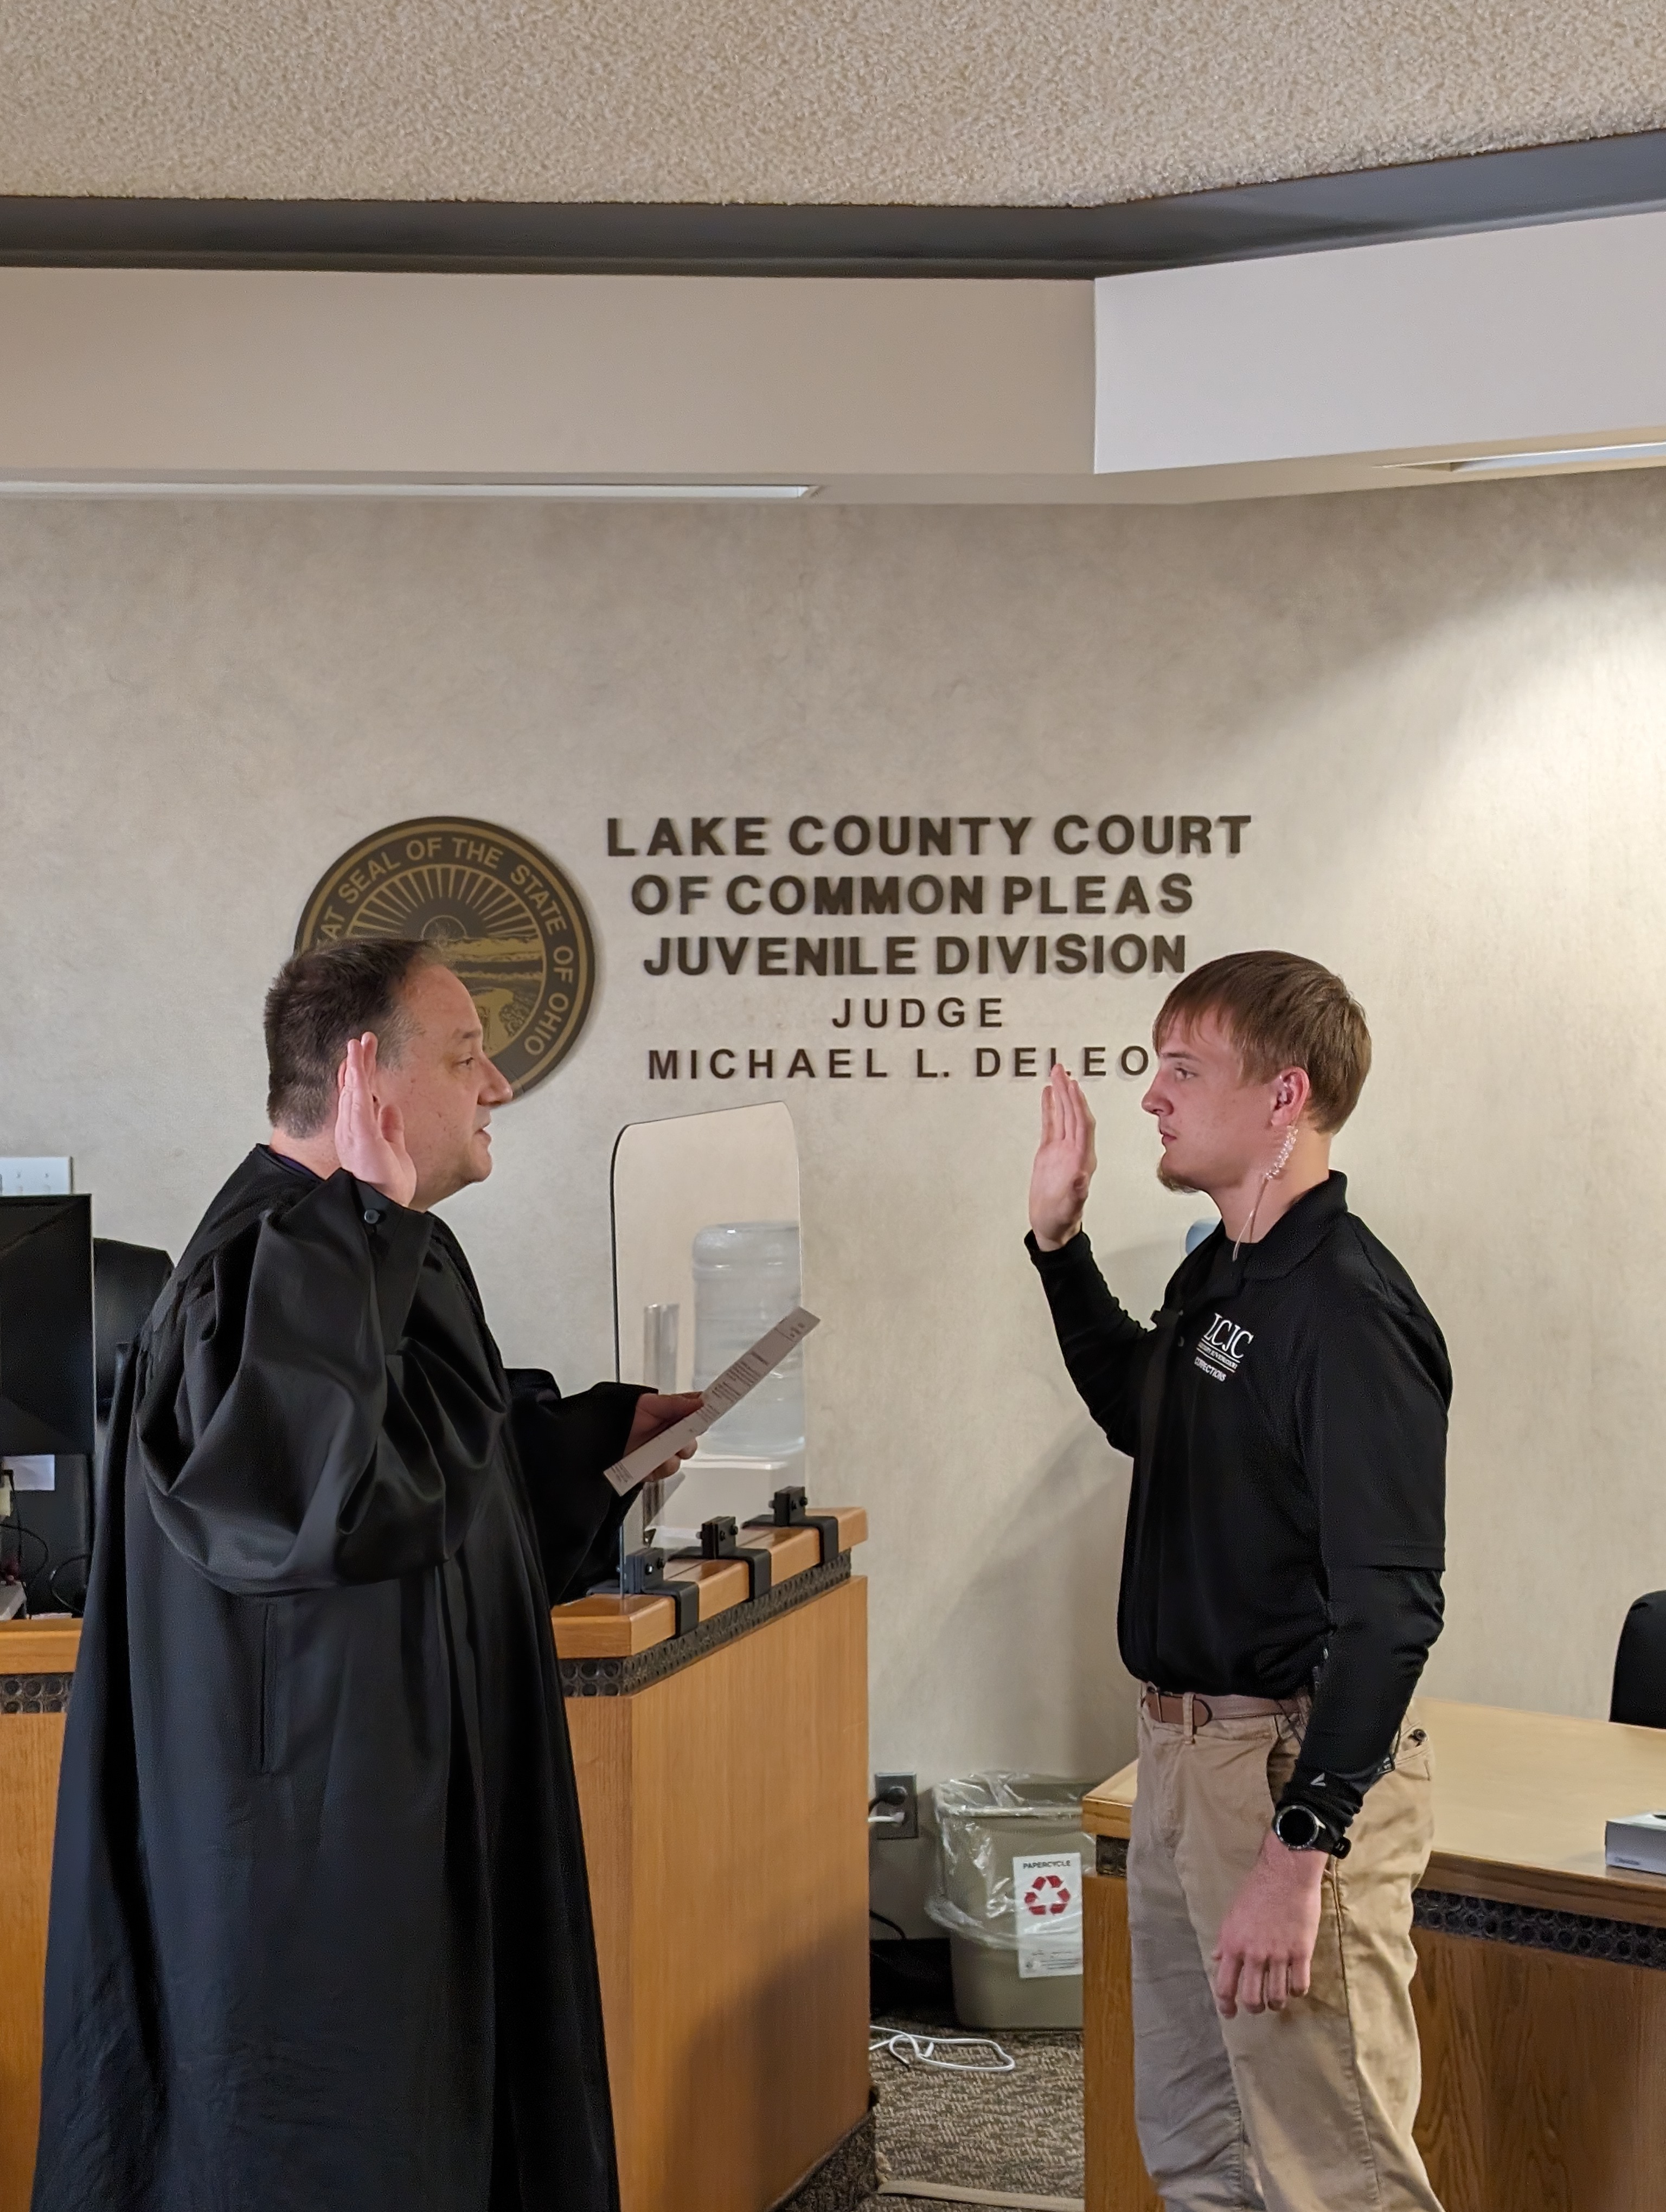 Judge DeLeone swearing in Jack Haskin as a Juvenile Corrections Officer